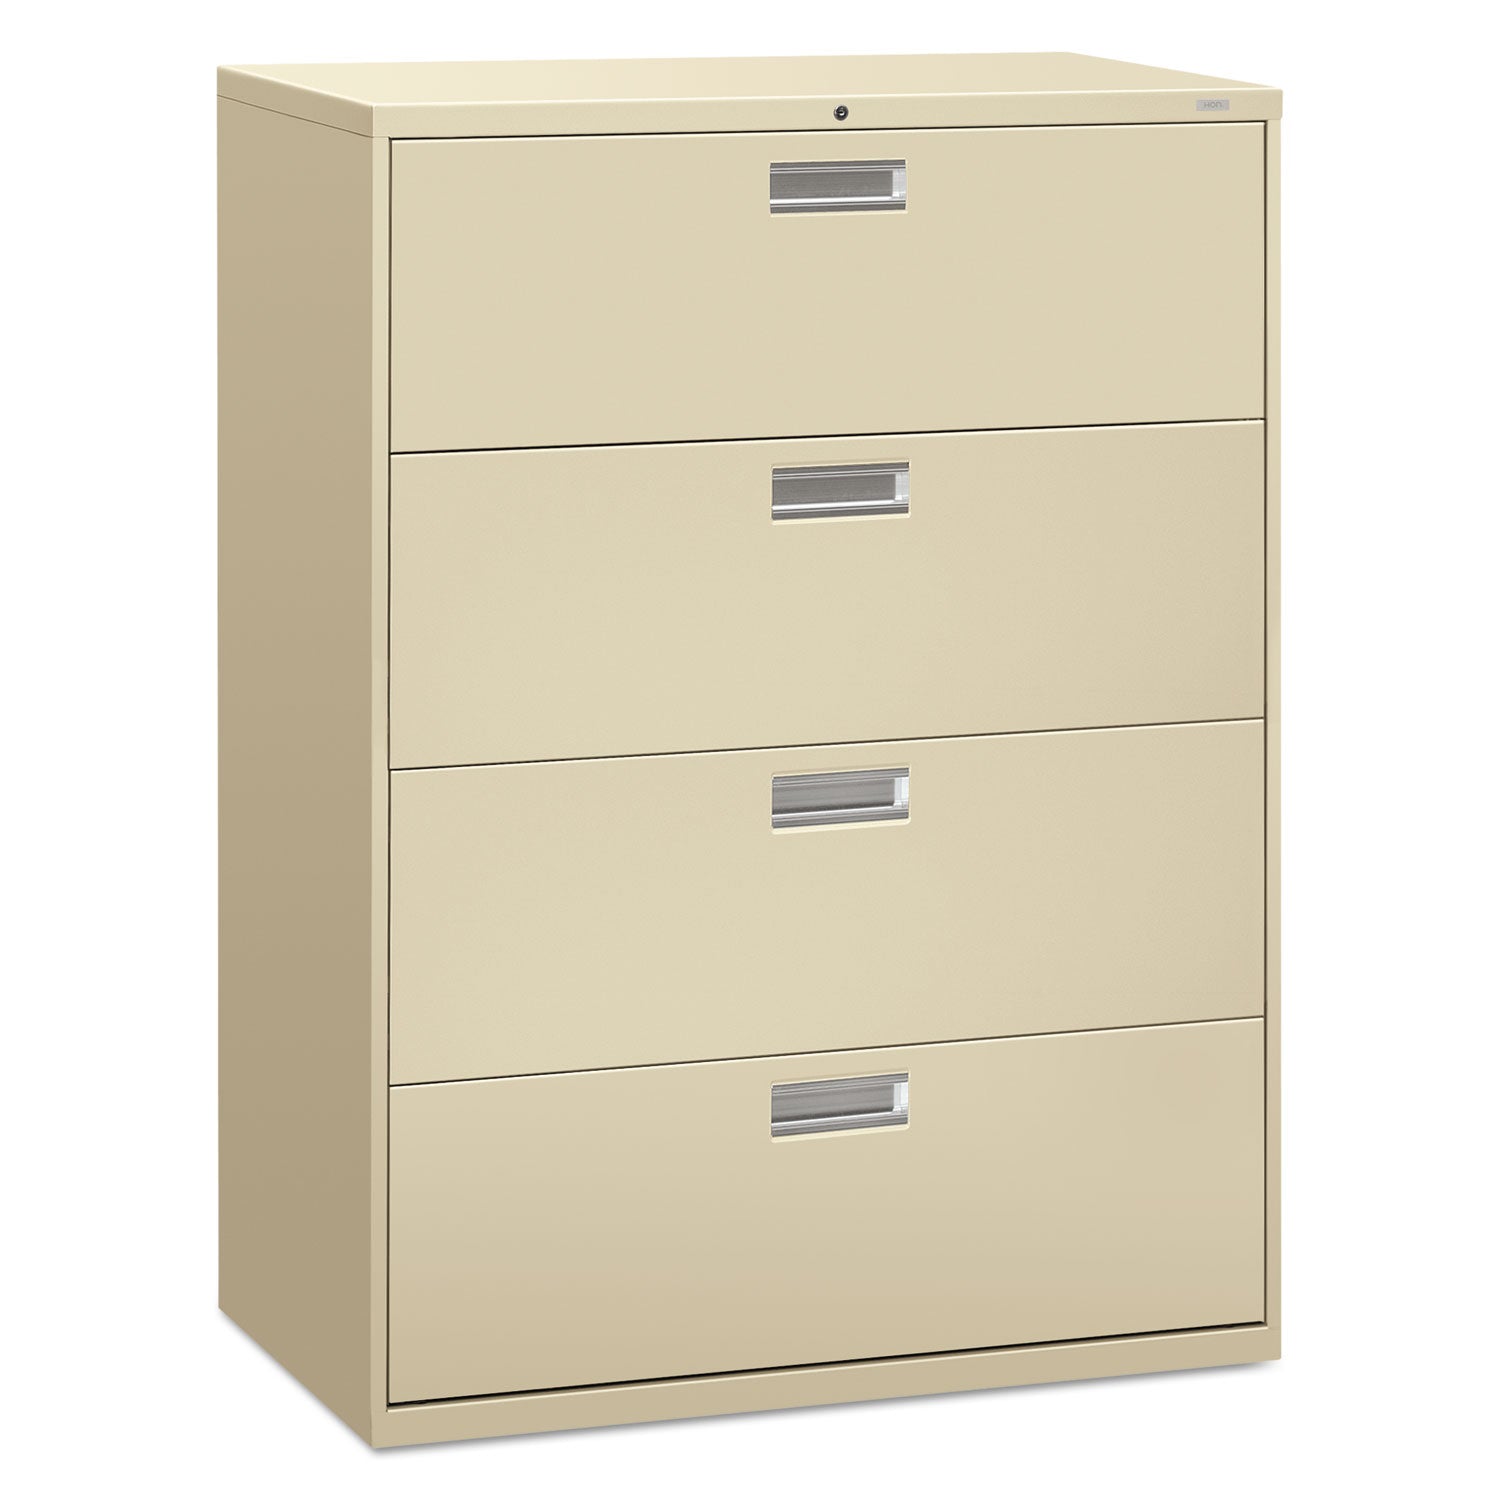 Brigade 600 Series Lateral File, 4 Legal/Letter-Size File Drawers, Putty, 42" x 18" x 52.5 - 